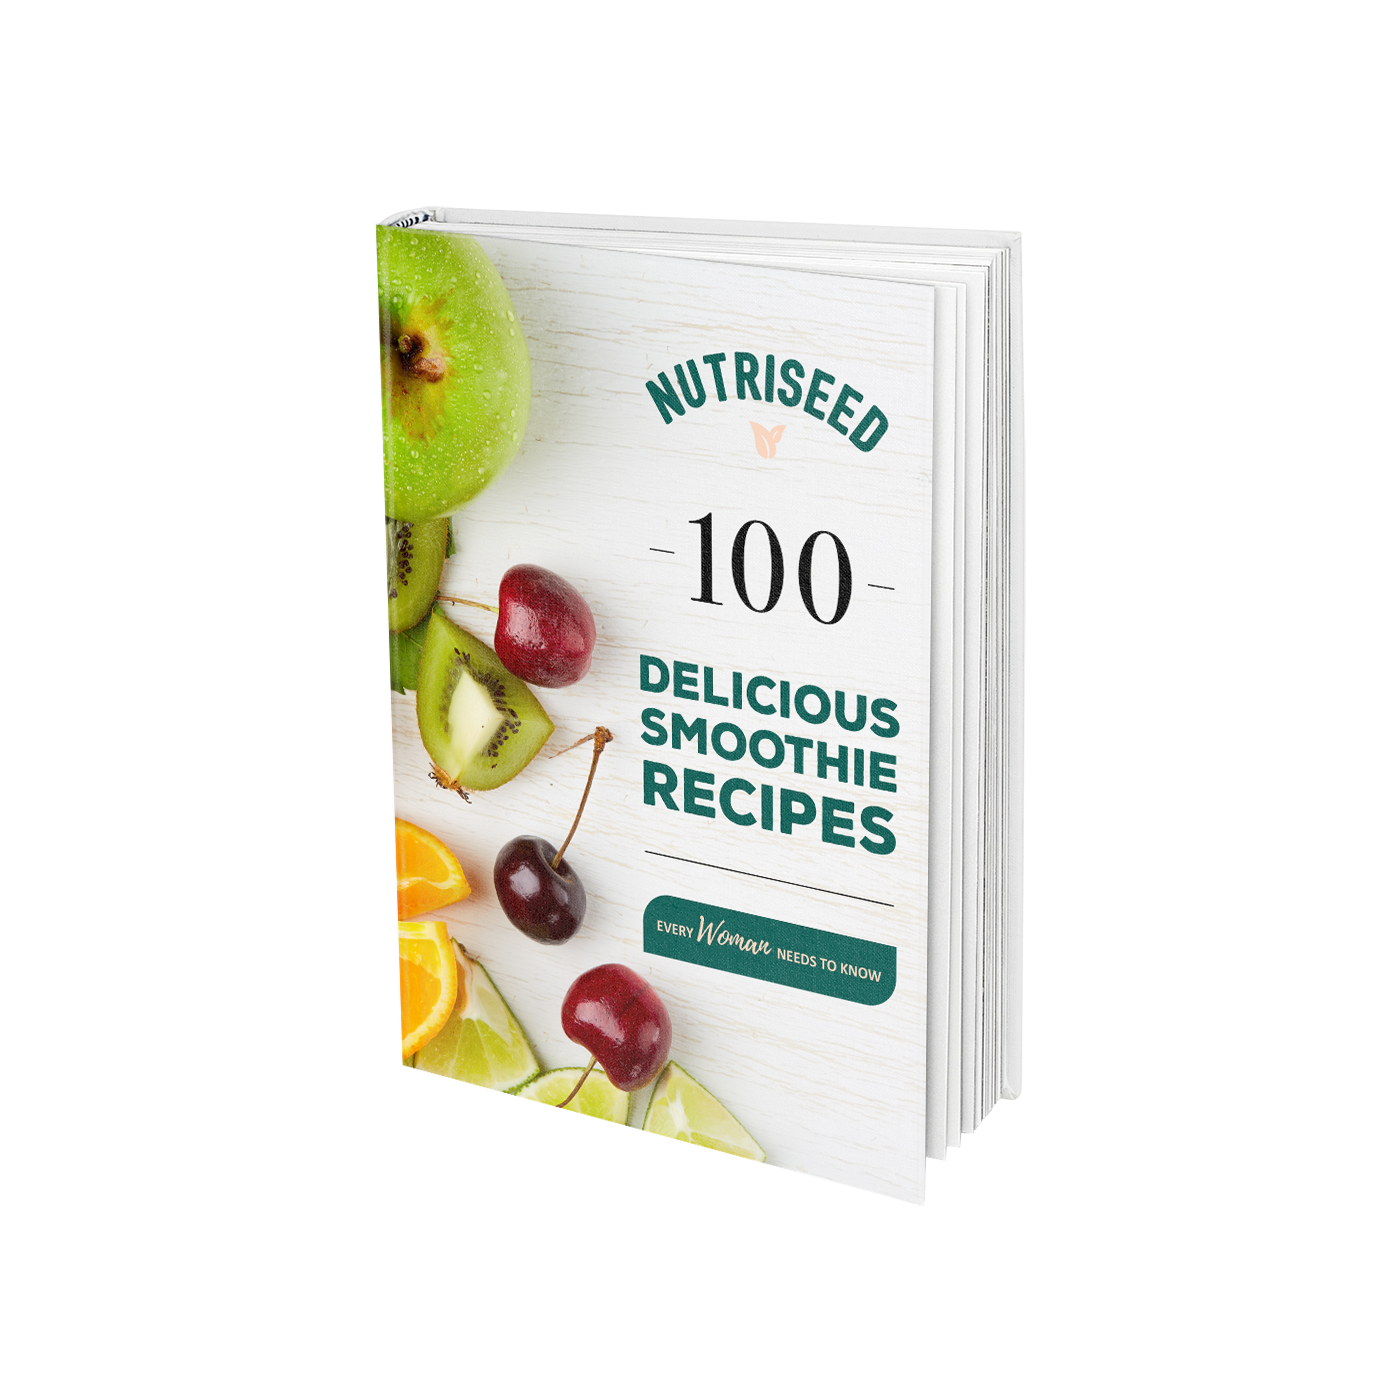 An image of 100 Total Superfood Recipes